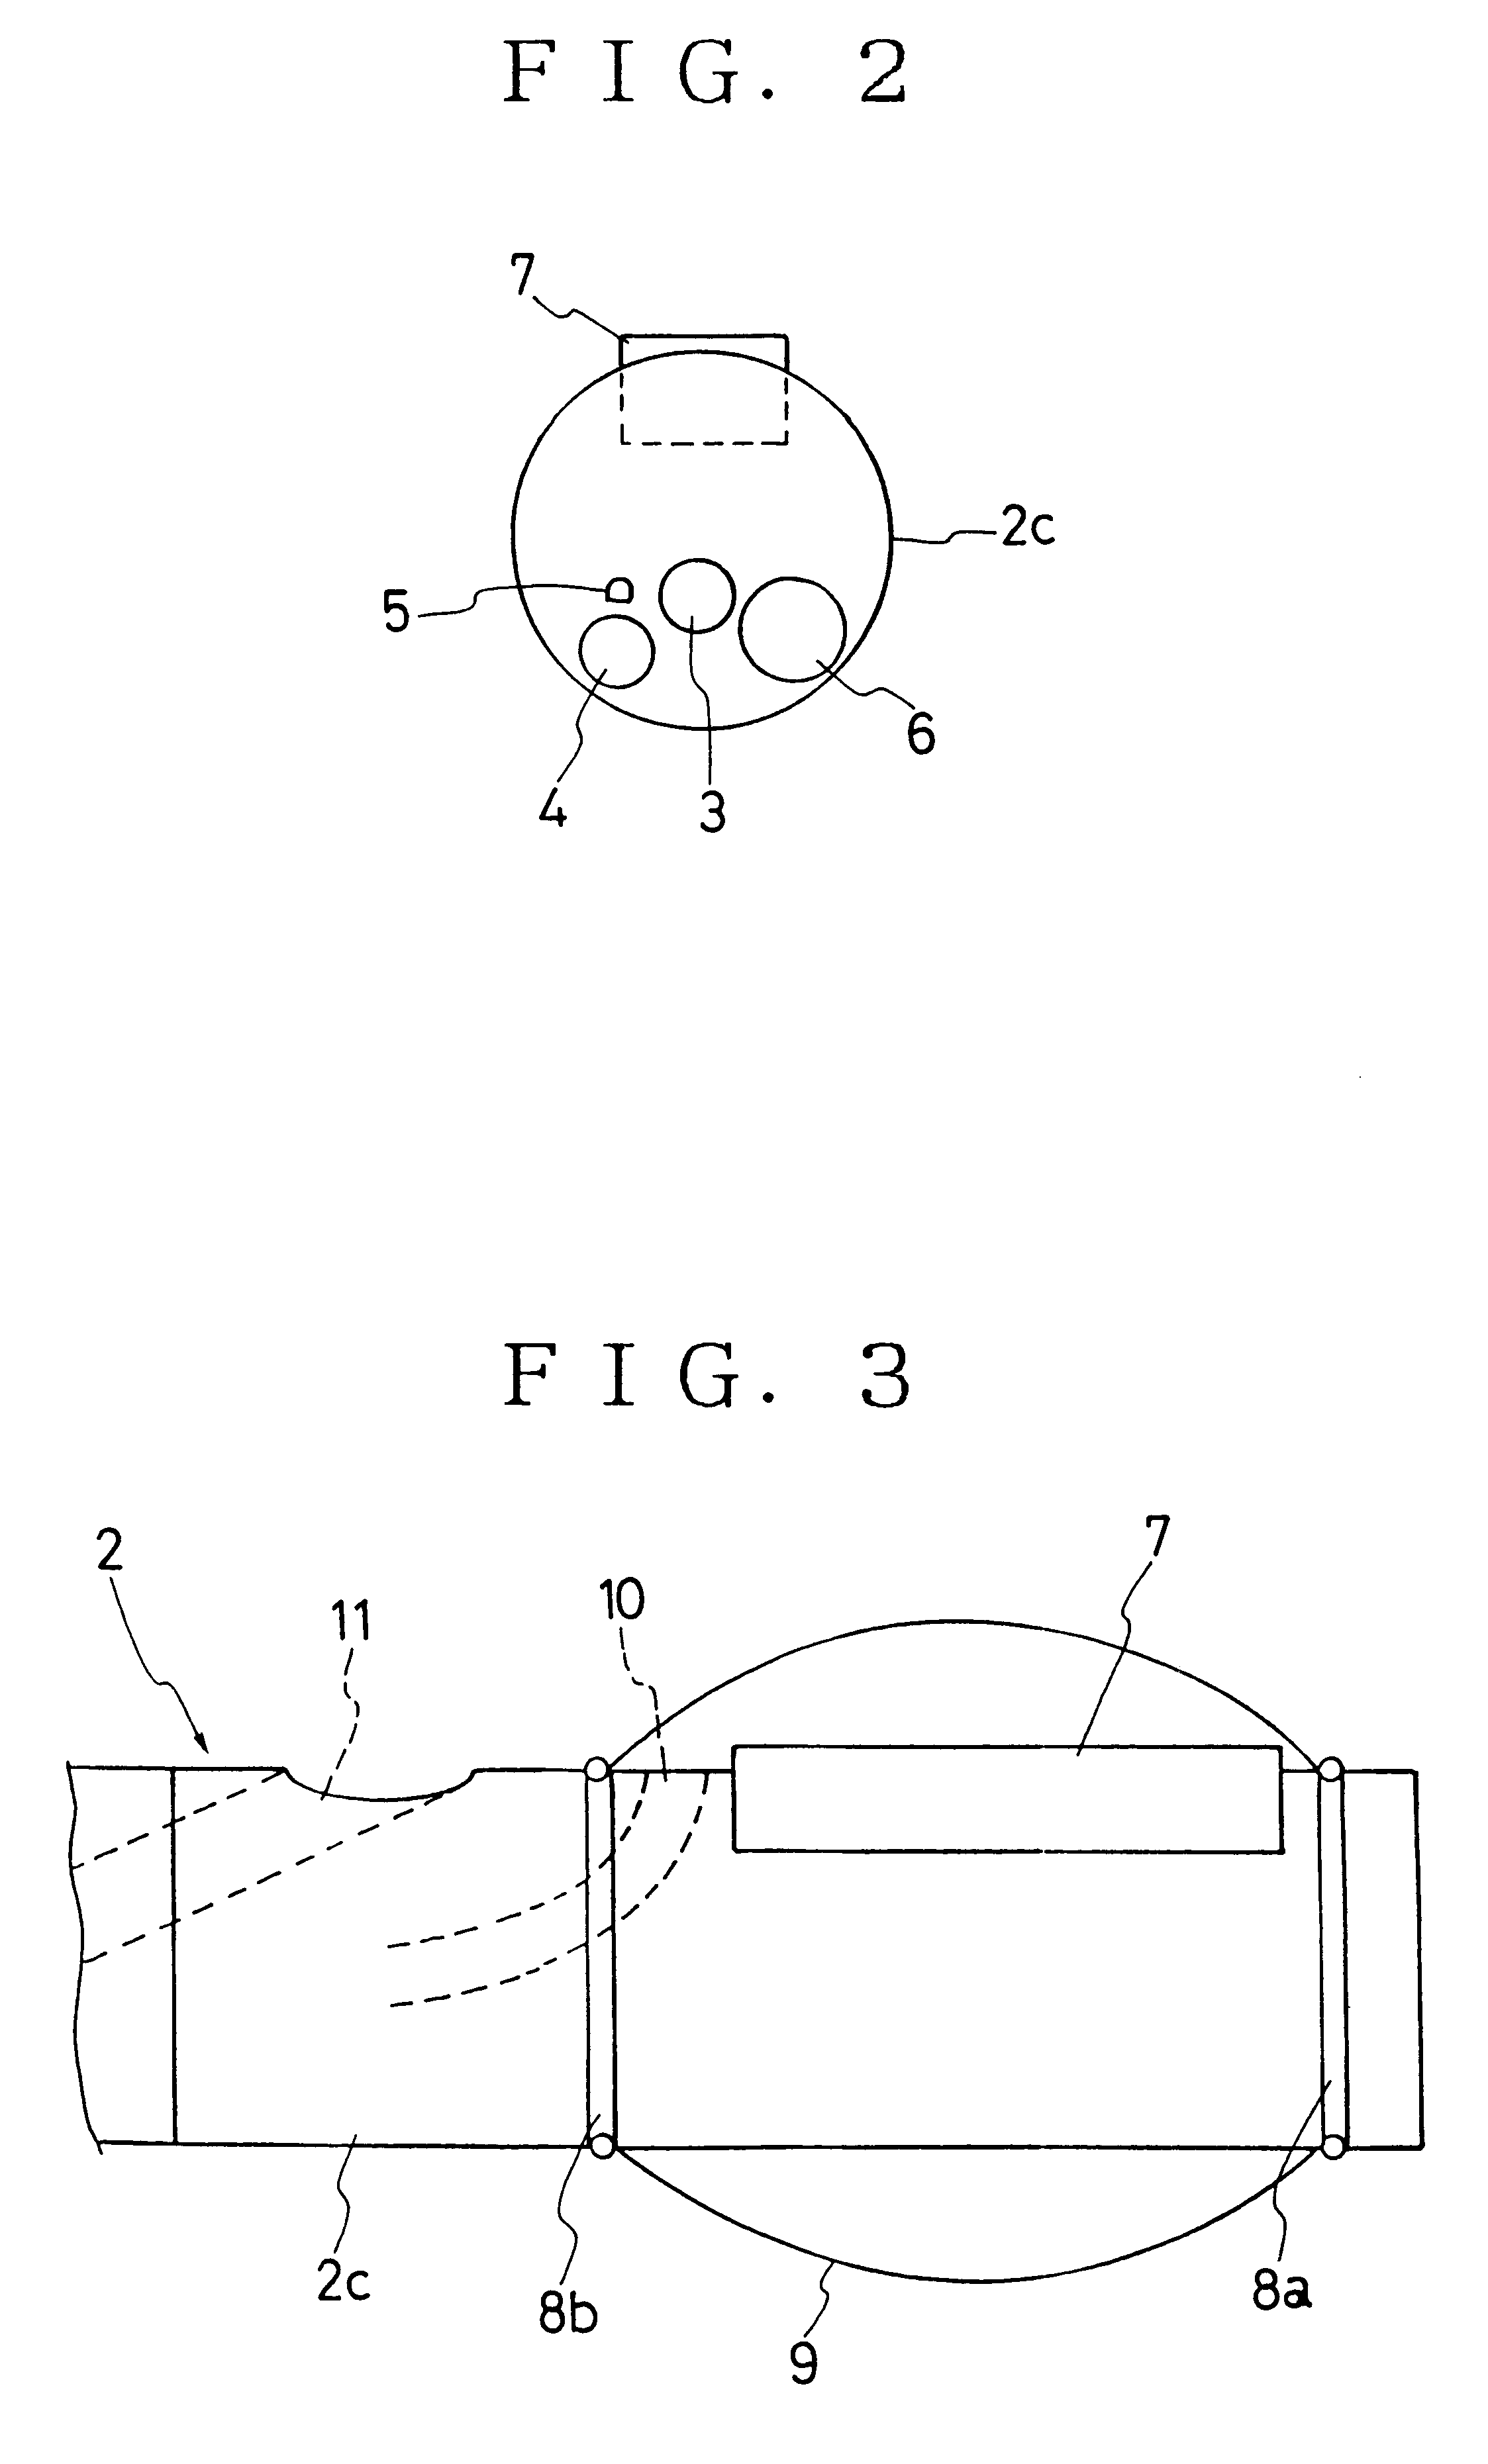 Puncture instrument for punctured high frequency treatments